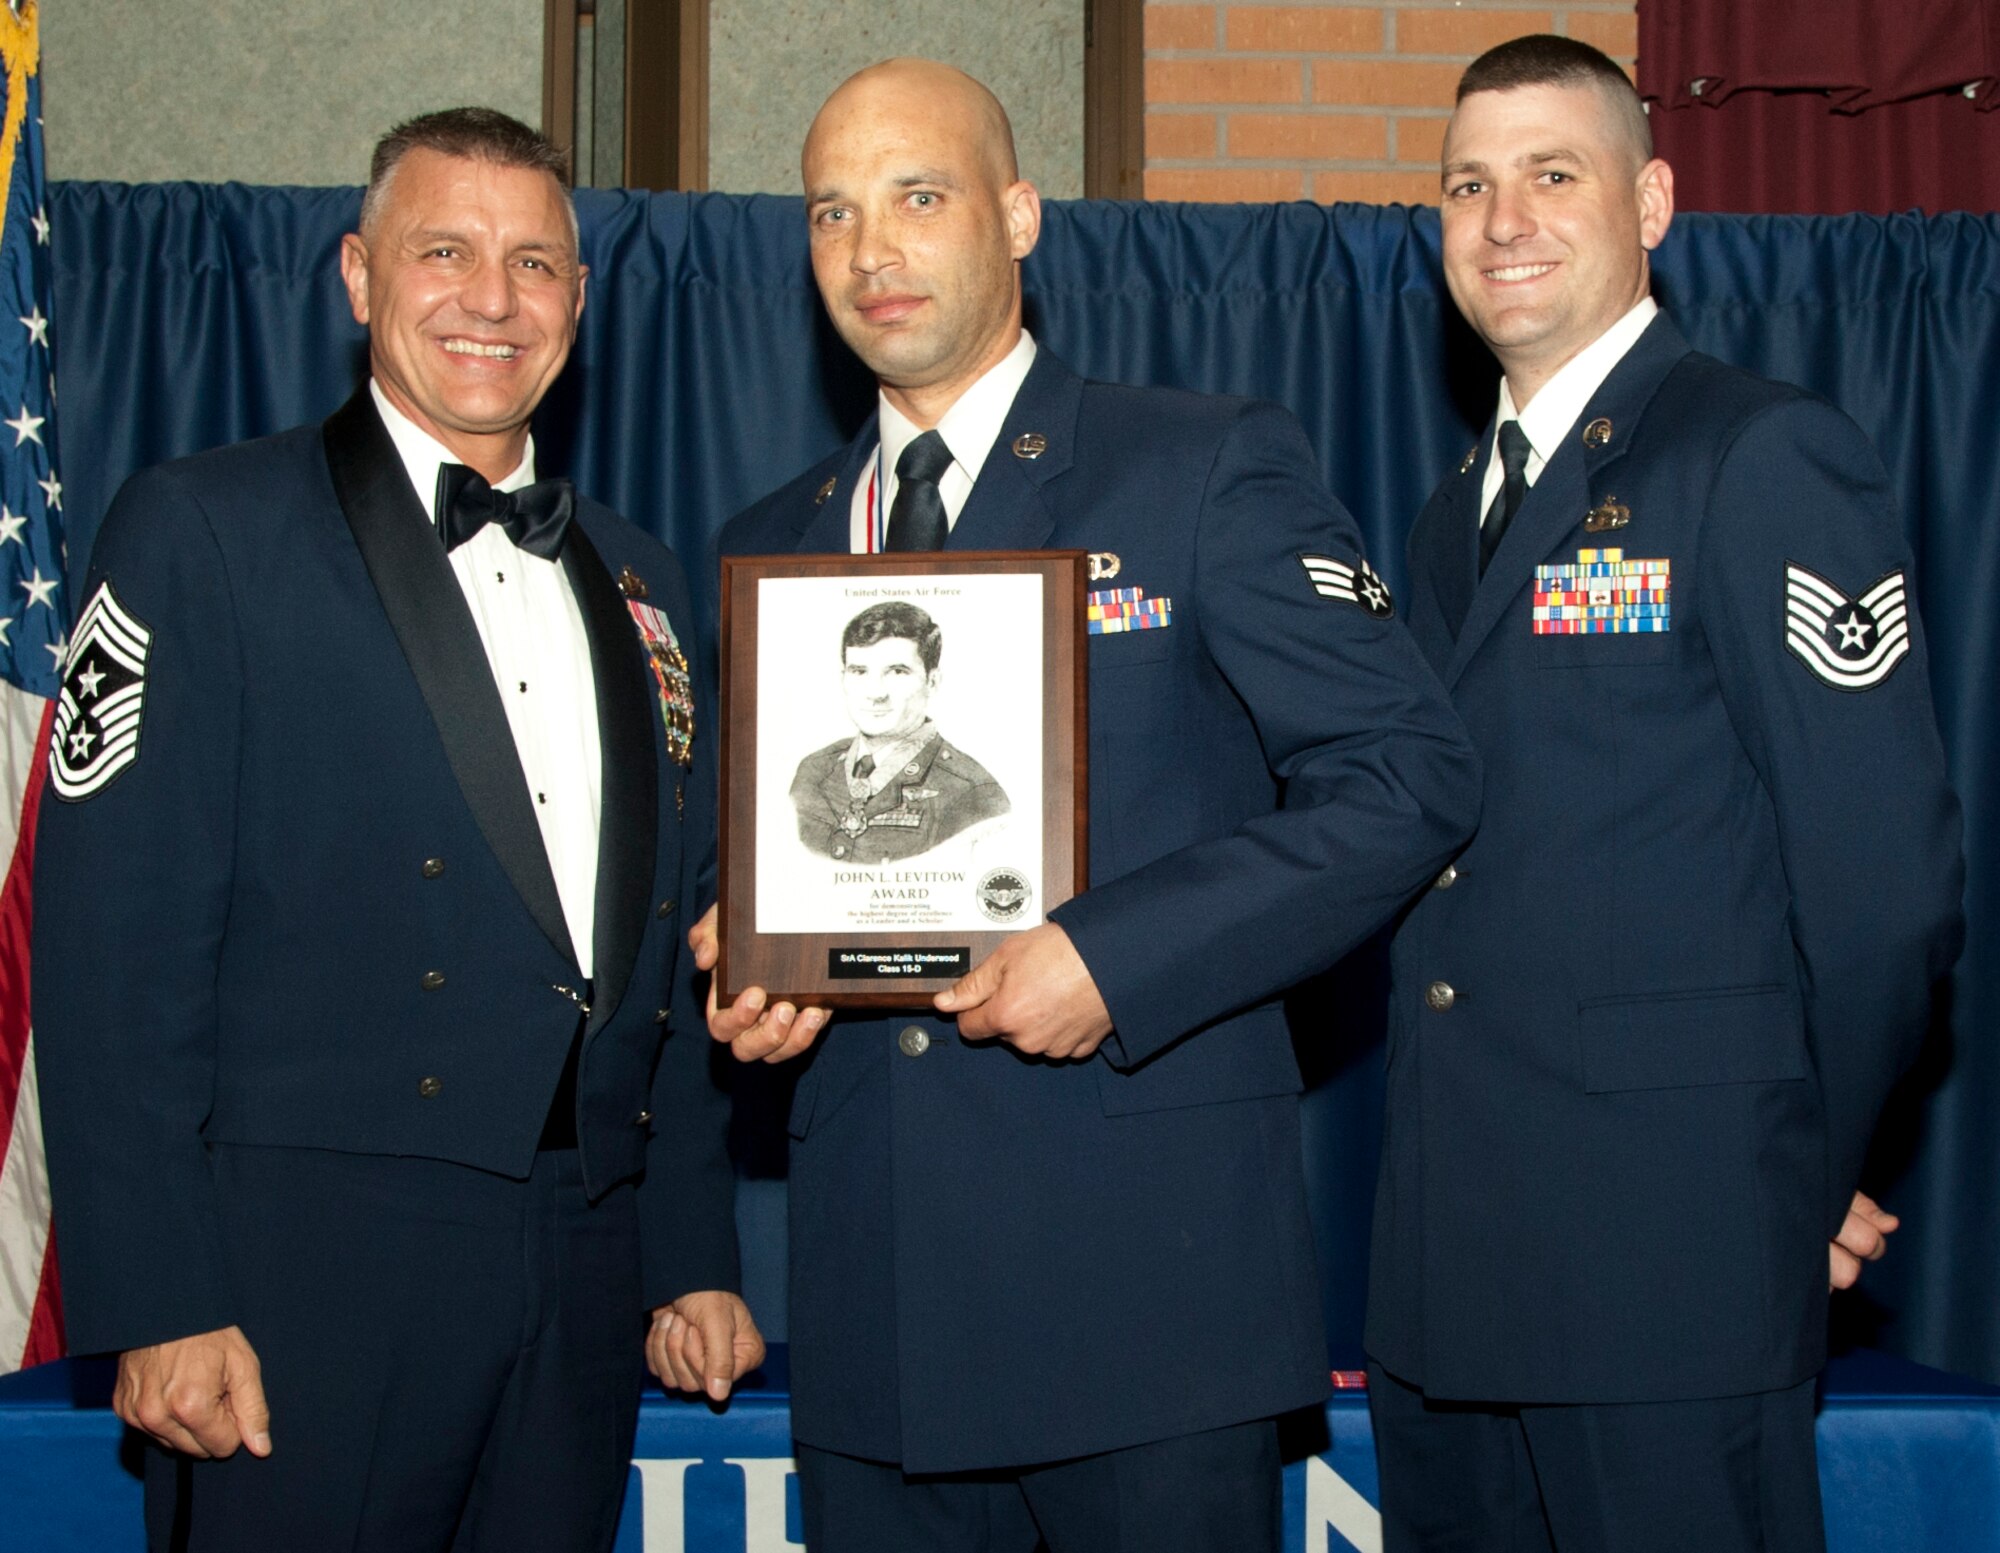 Senior Airman Jeremy Kalik-Underwood, from the 71st Operations Support Squadron, is presented the John L. Levitow Award by Command Chief Master Sgt. Peter Speen, the 71st Flying Training Wing command chief, and Tech. Sgt. James Bolinger, the 71st FTW Public Affairs Office NCO in-charge, March 25 during the first-ever Airman Leadership School graduation at Vance in the Vance Collocated Club. Bolinger was representing the Air Force Sergeants Association Chapter 990 who sponsored the award. (U.S. Air Force photo\2nd Lt. Isabel Crump)